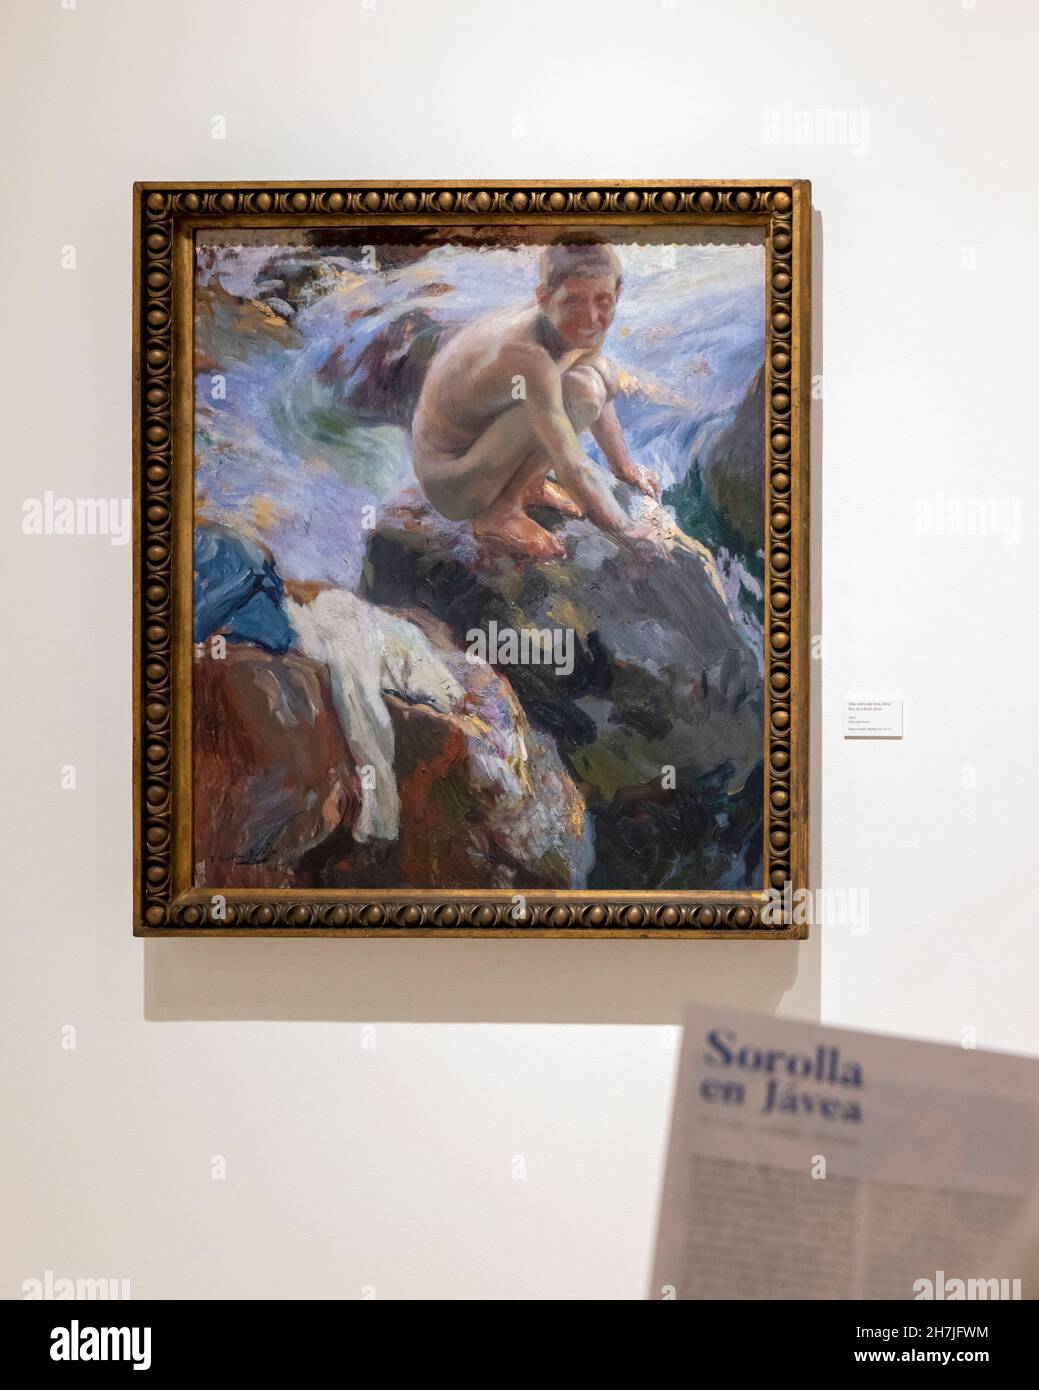 and sorolla - stock images Alamy Museum hi-res painter joaquin photography